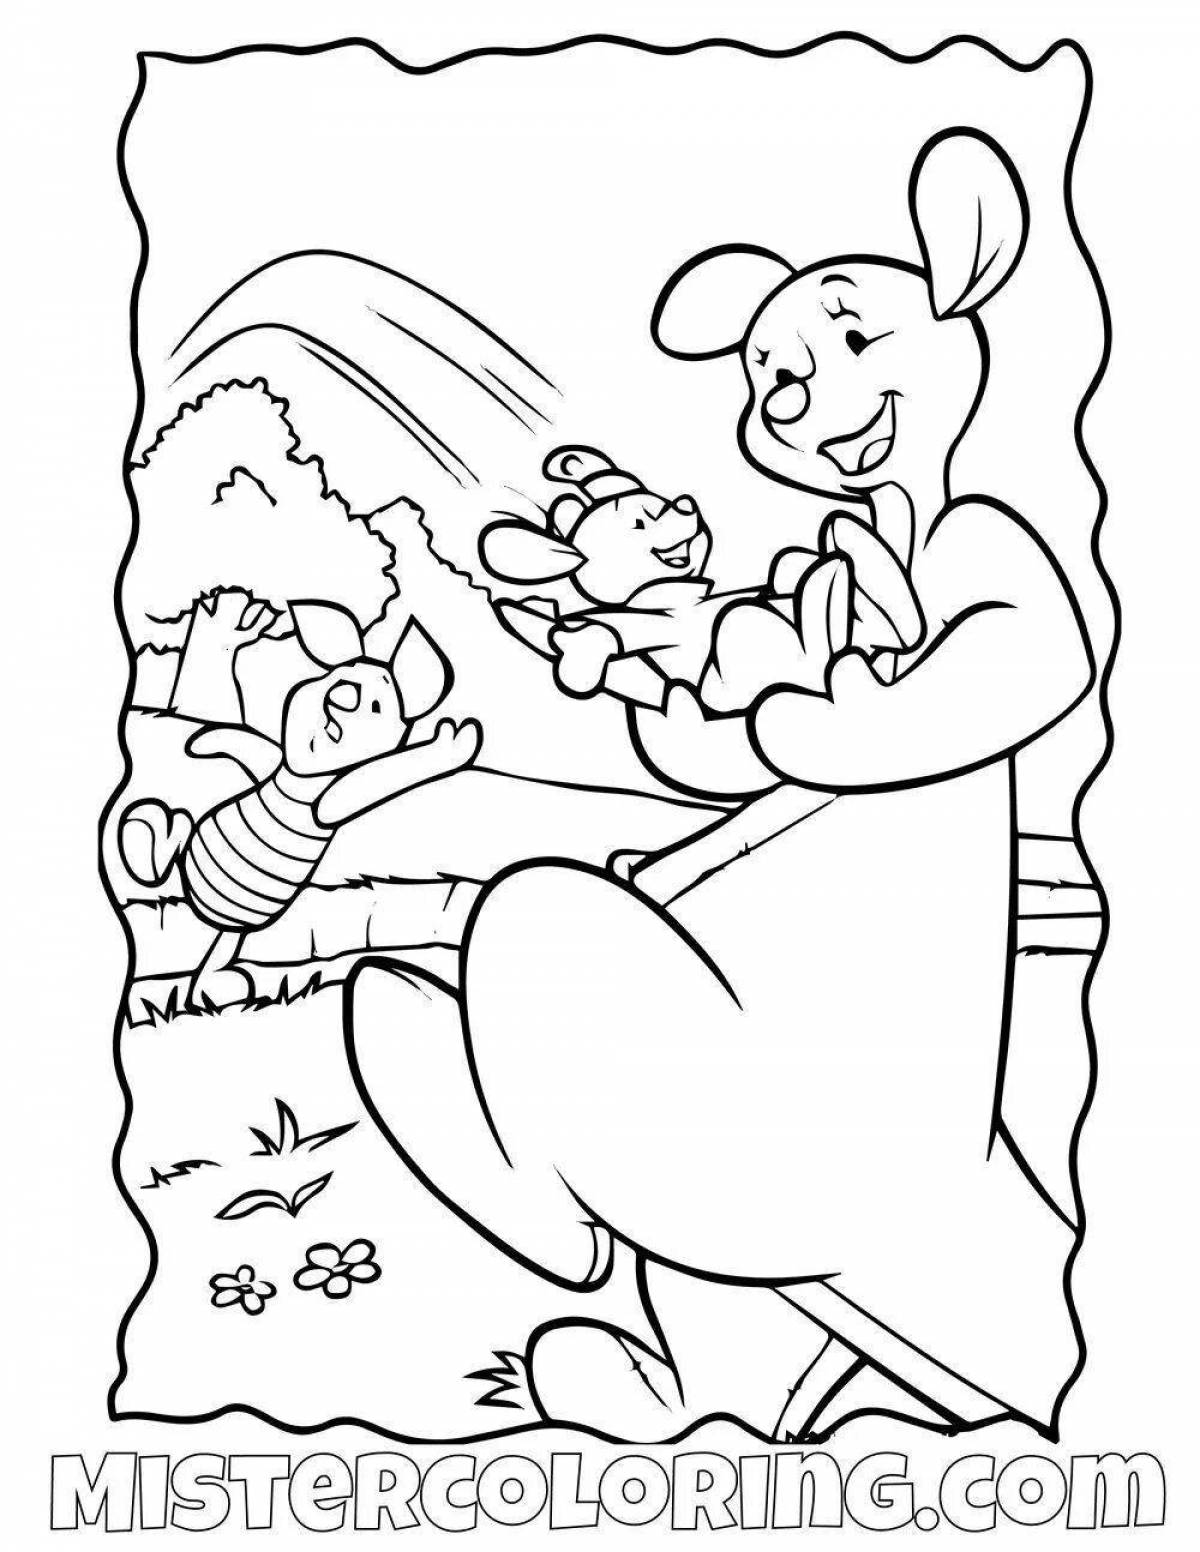 Glowing funky uncle mokus coloring page